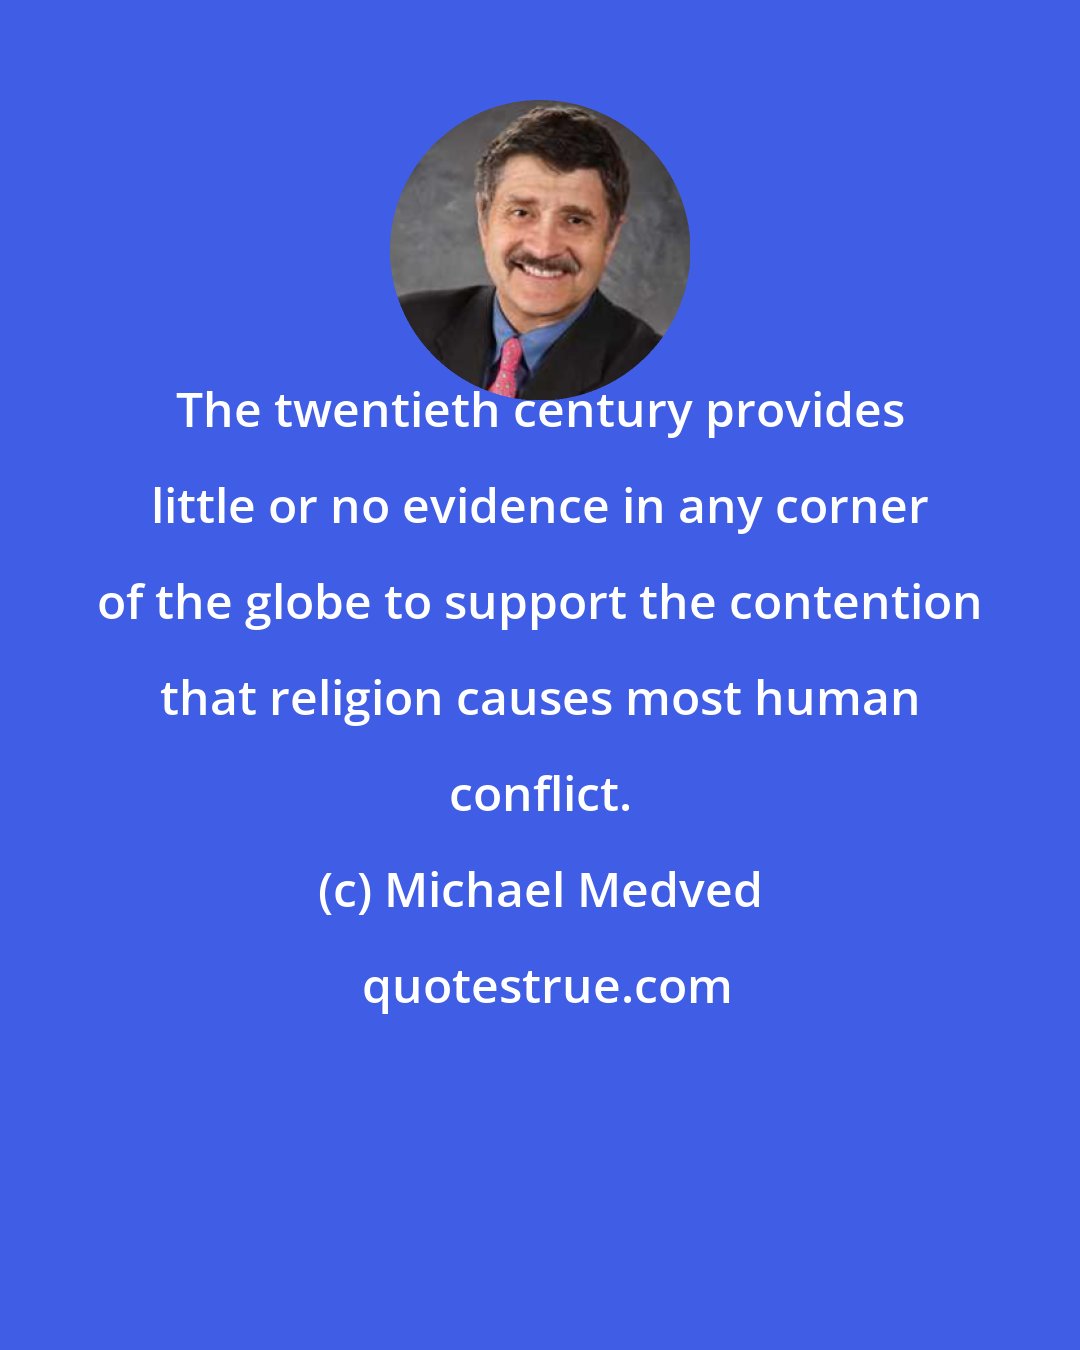 Michael Medved: The twentieth century provides little or no evidence in any corner of the globe to support the contention that religion causes most human conflict.